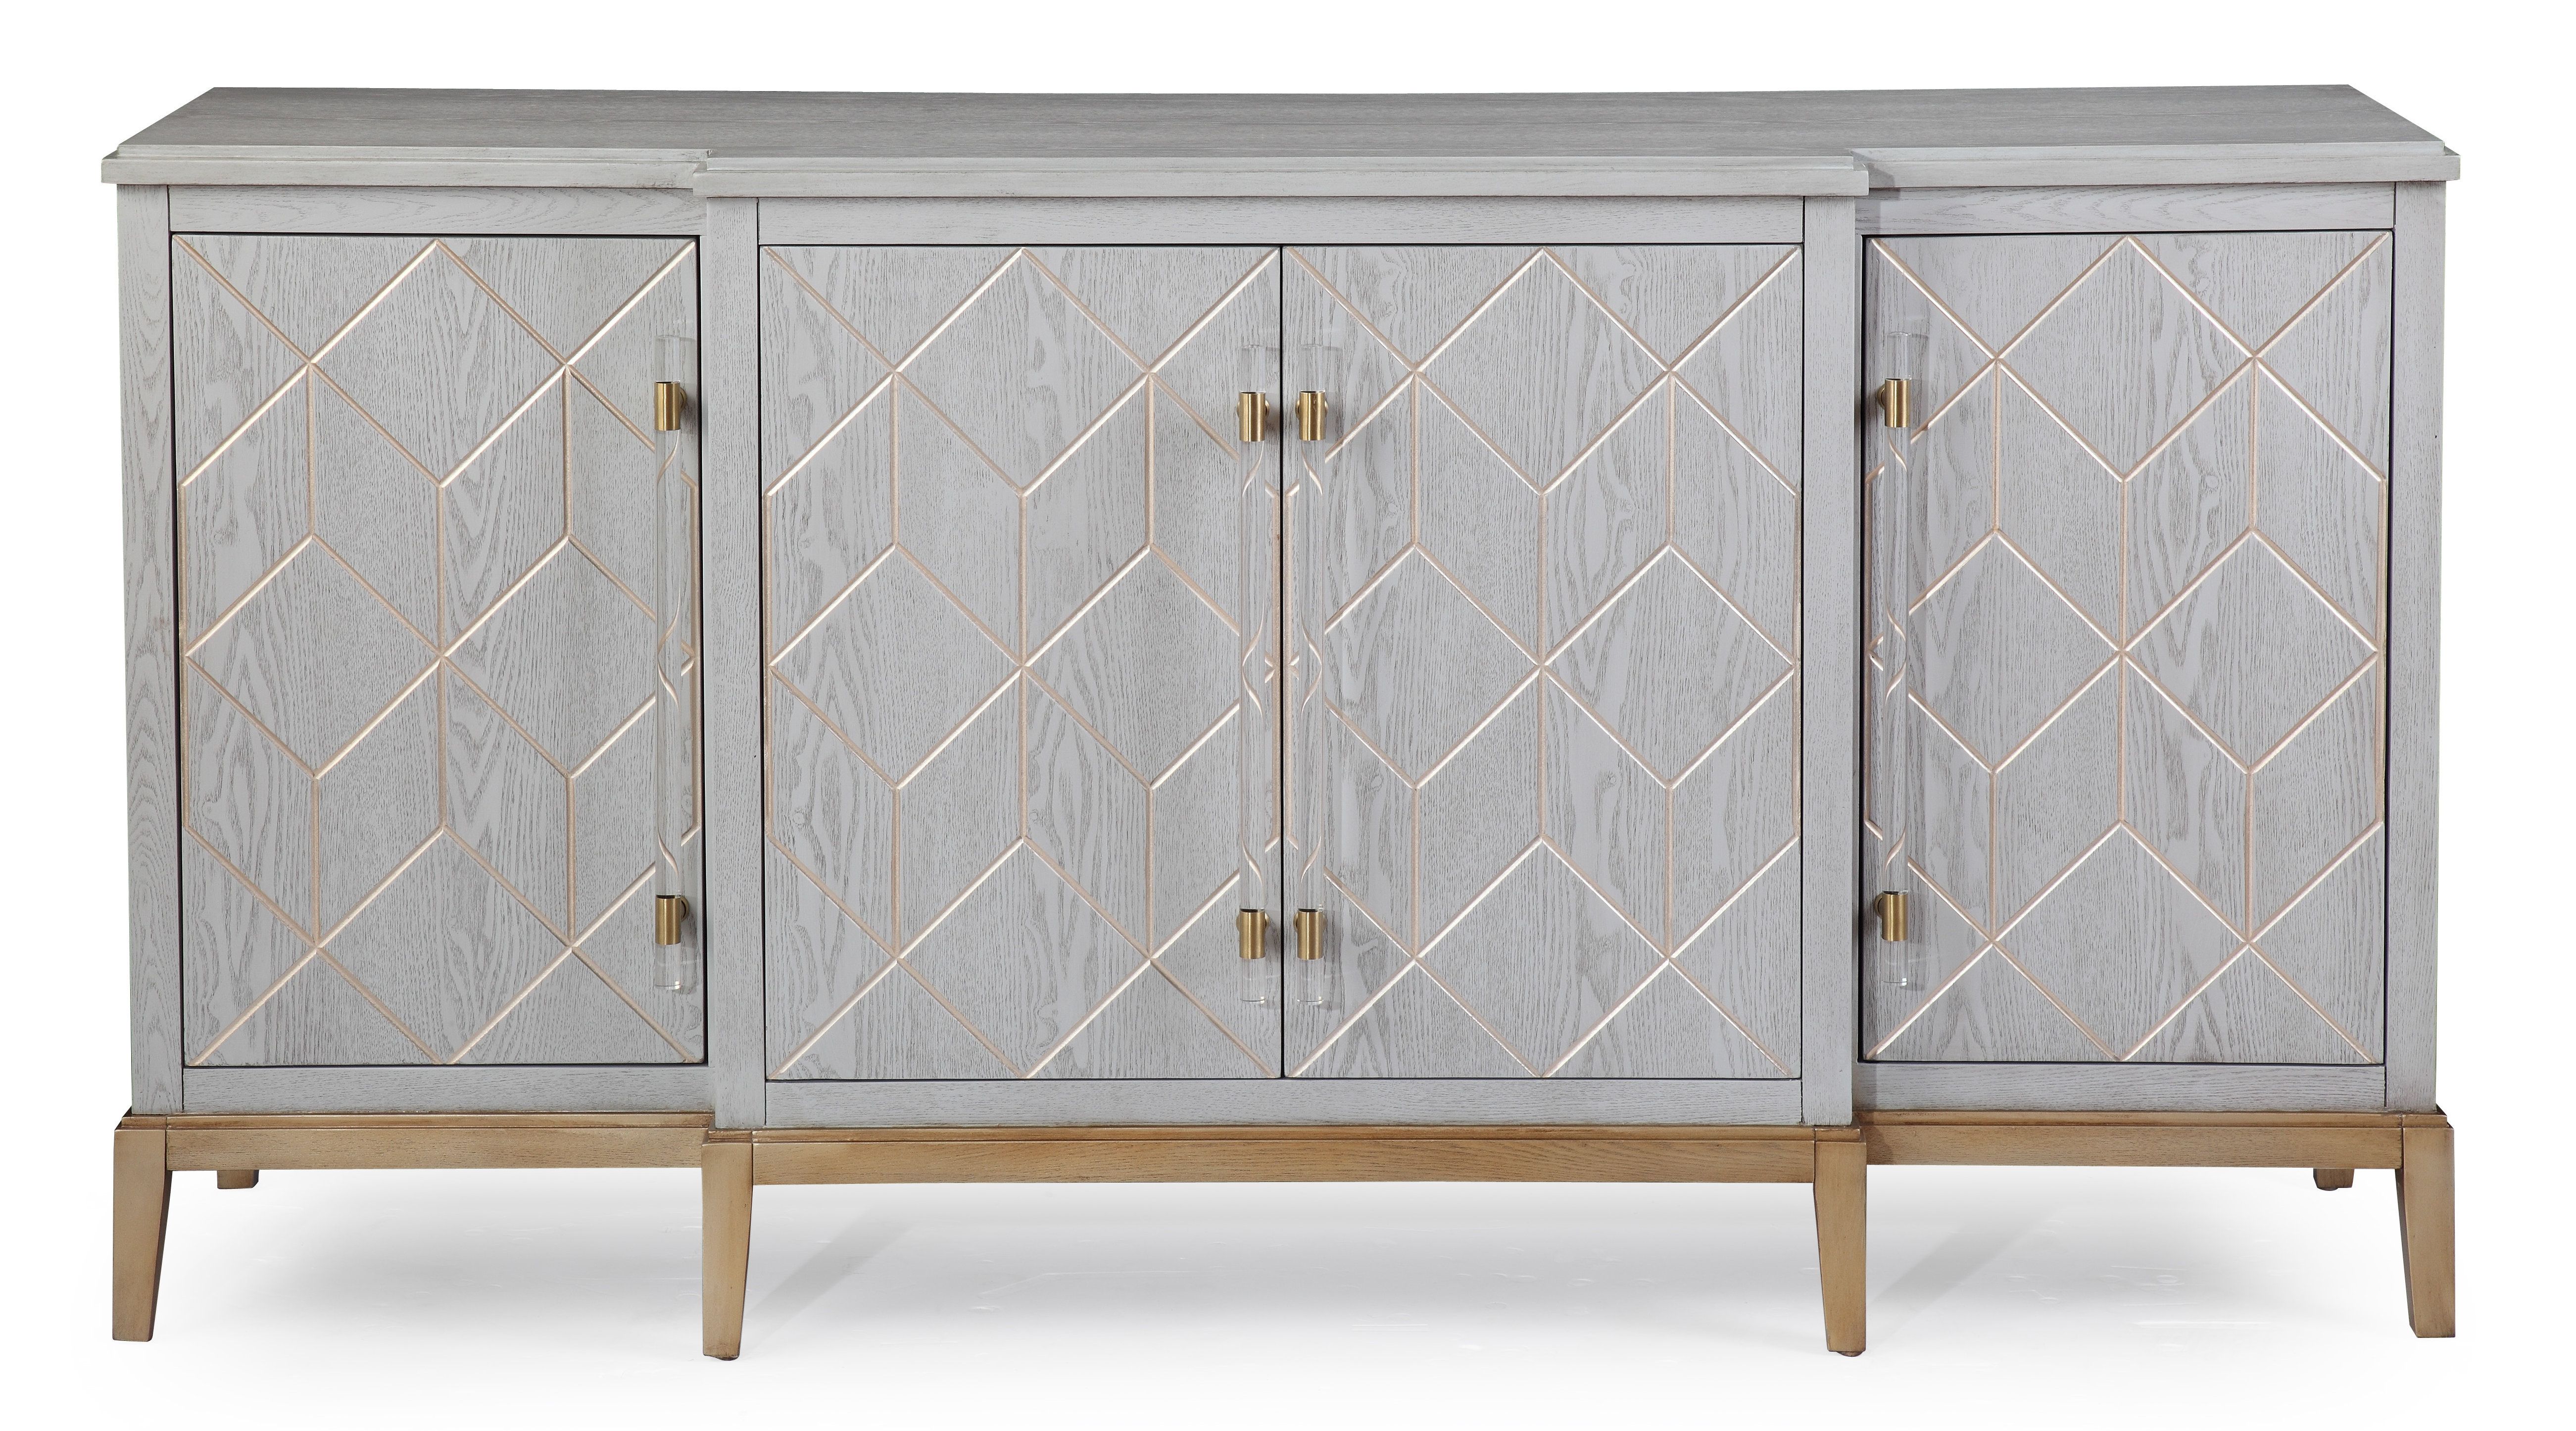 Cabinet Equipped Sideboards & Buffets | Joss & Main Inside 2018 Whitten Sideboards (View 16 of 20)